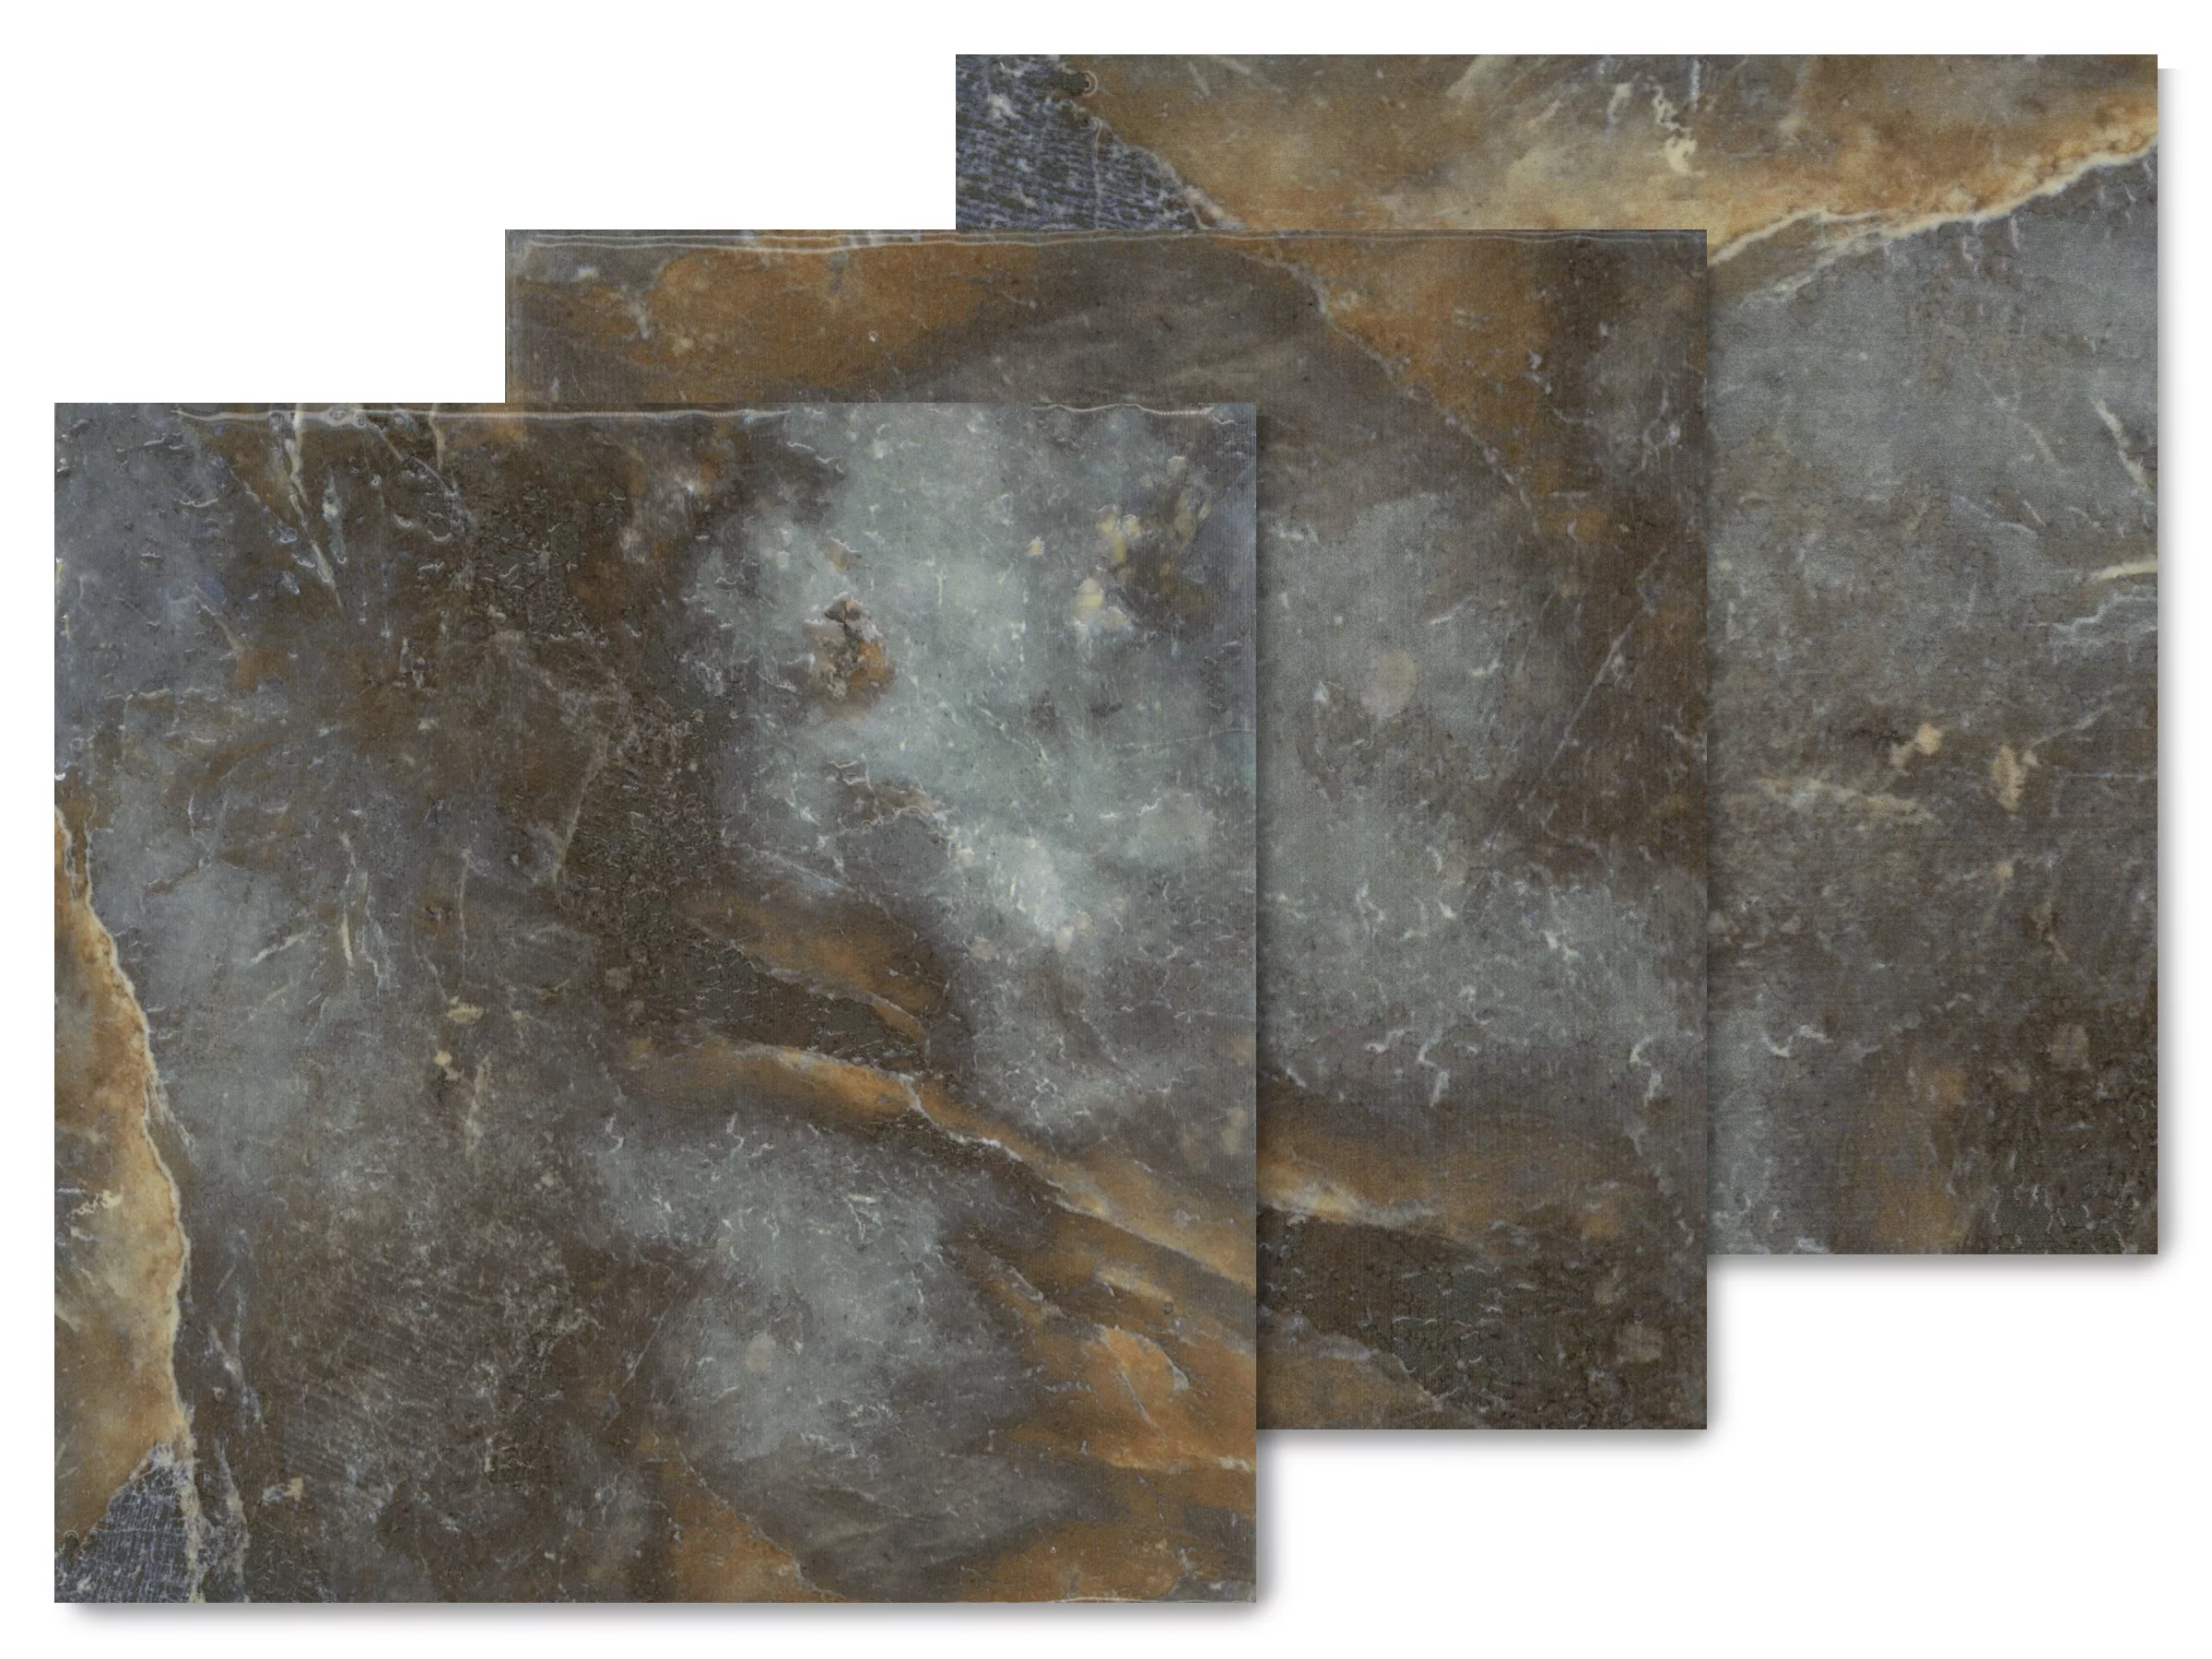 Nepal 6 inch by 6 inch tile